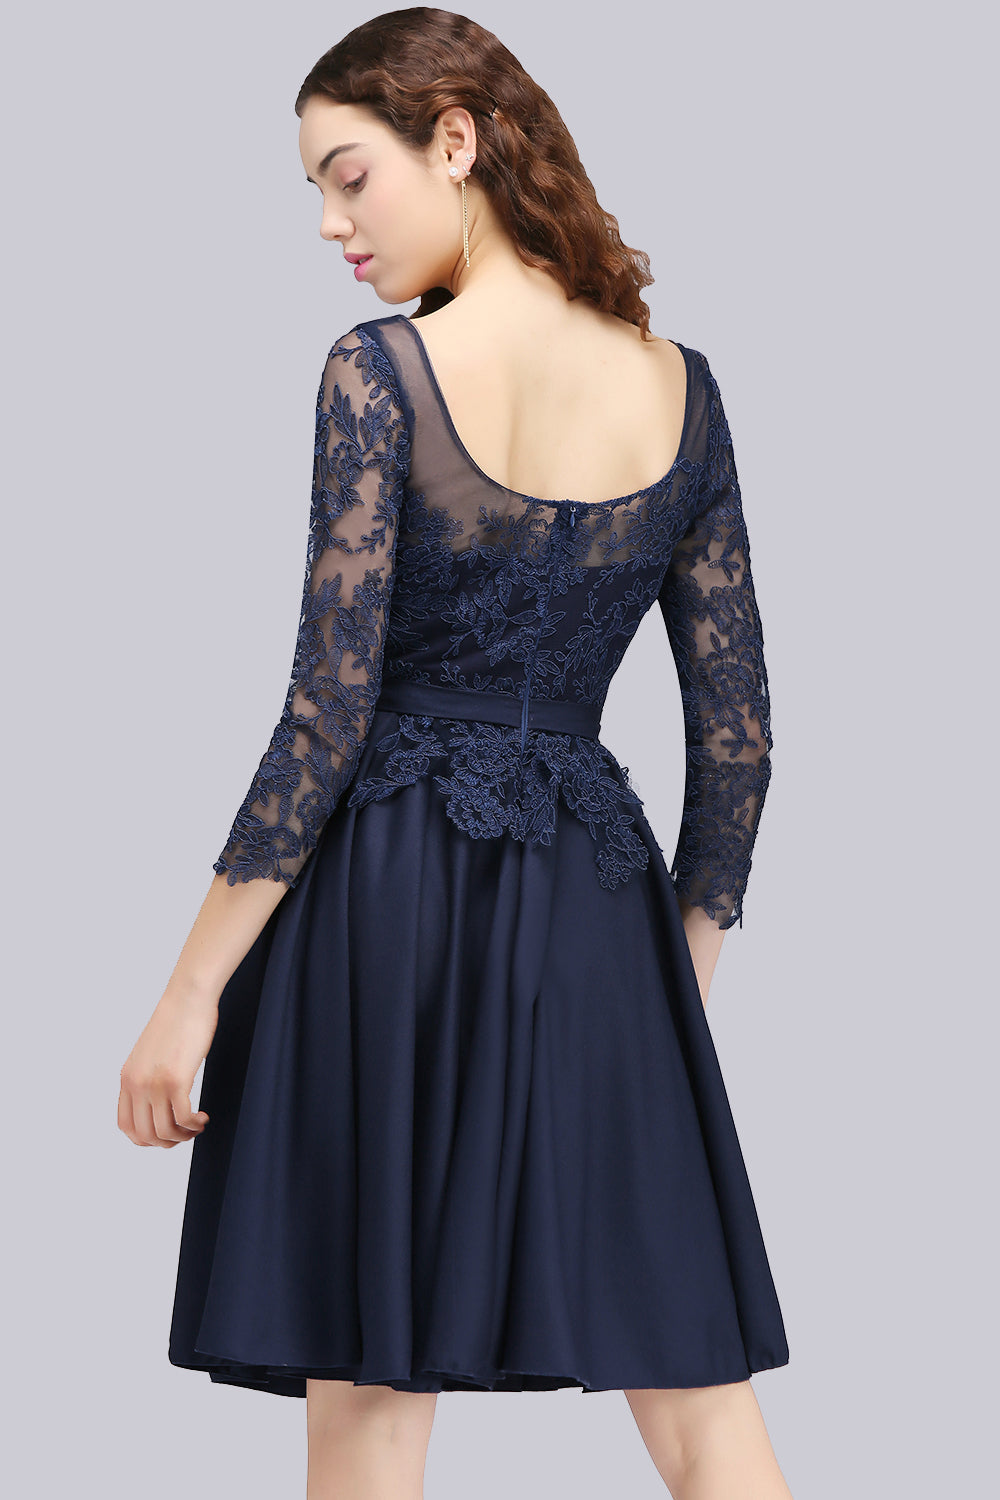 Modest 3/4 Sleeves Short Navy Lace Bridesmaid Dresses with Appliques